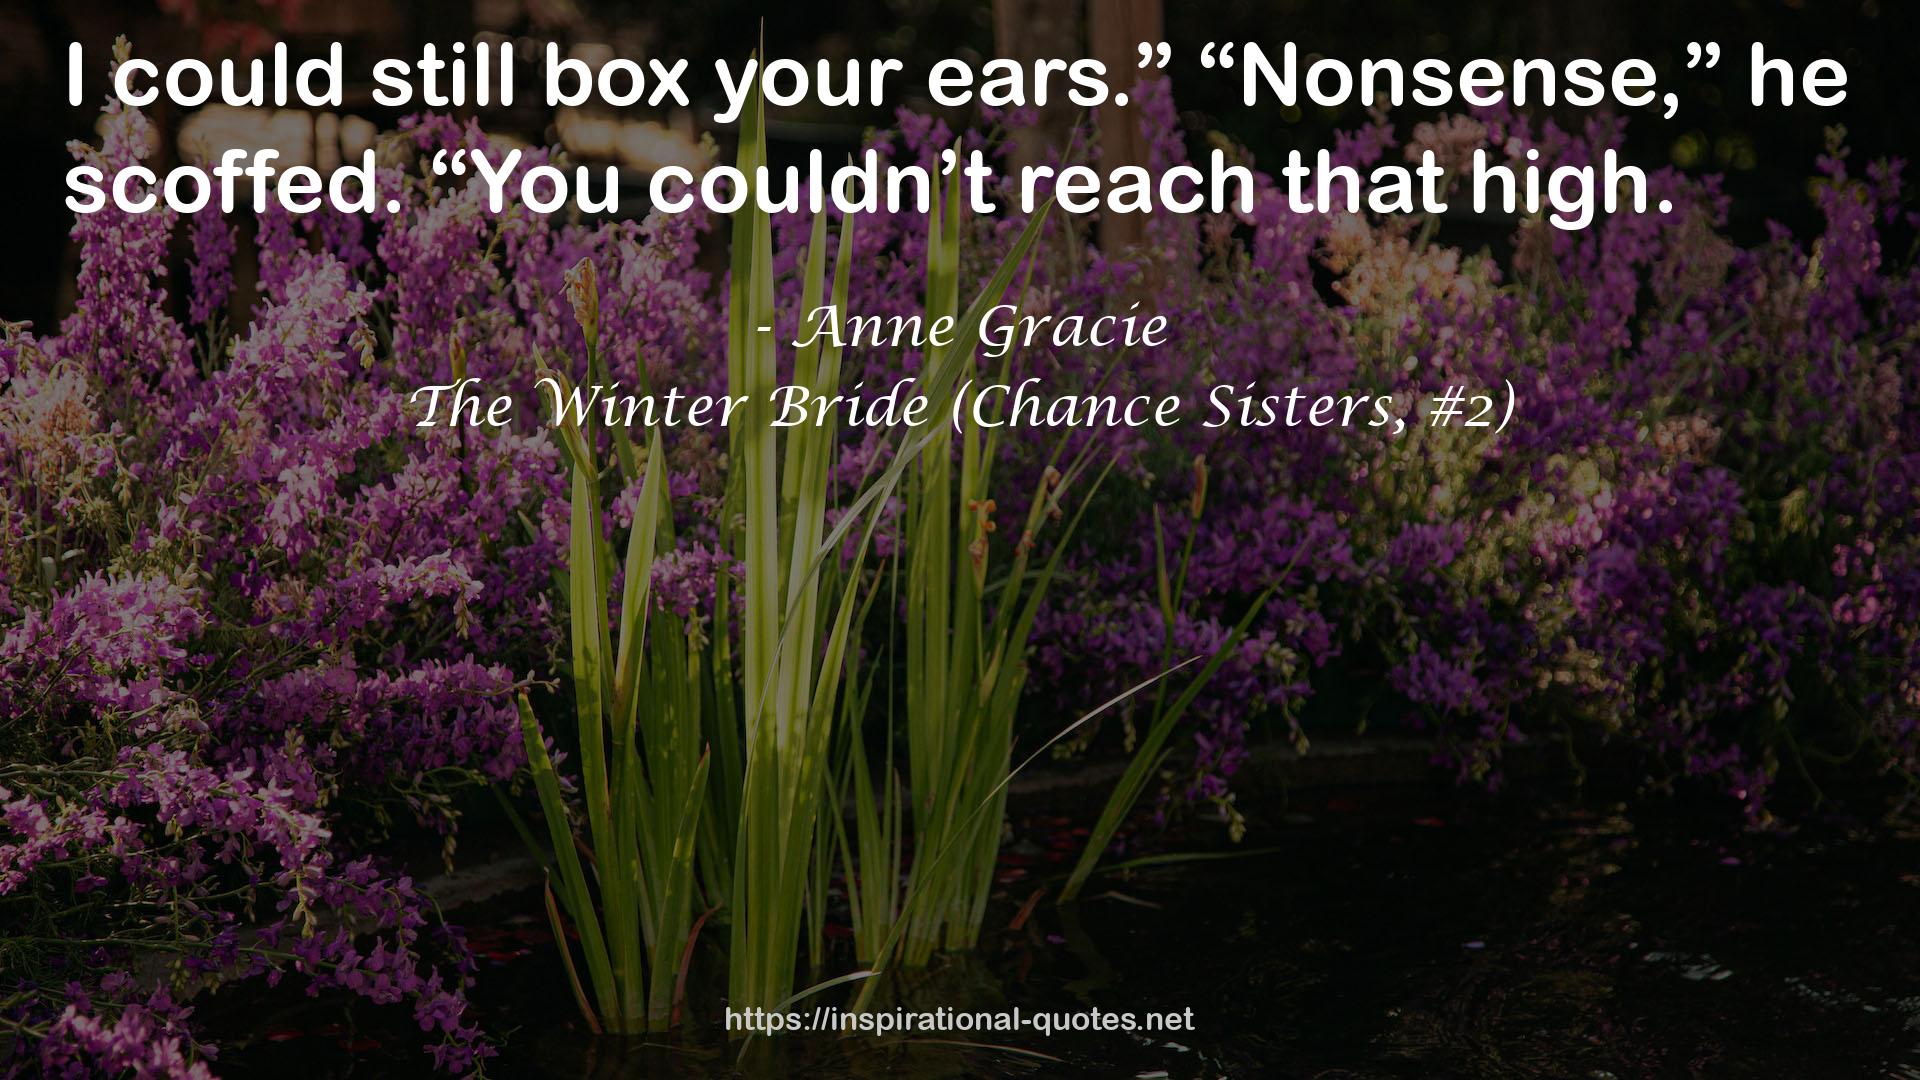 The Winter Bride (Chance Sisters, #2) QUOTES